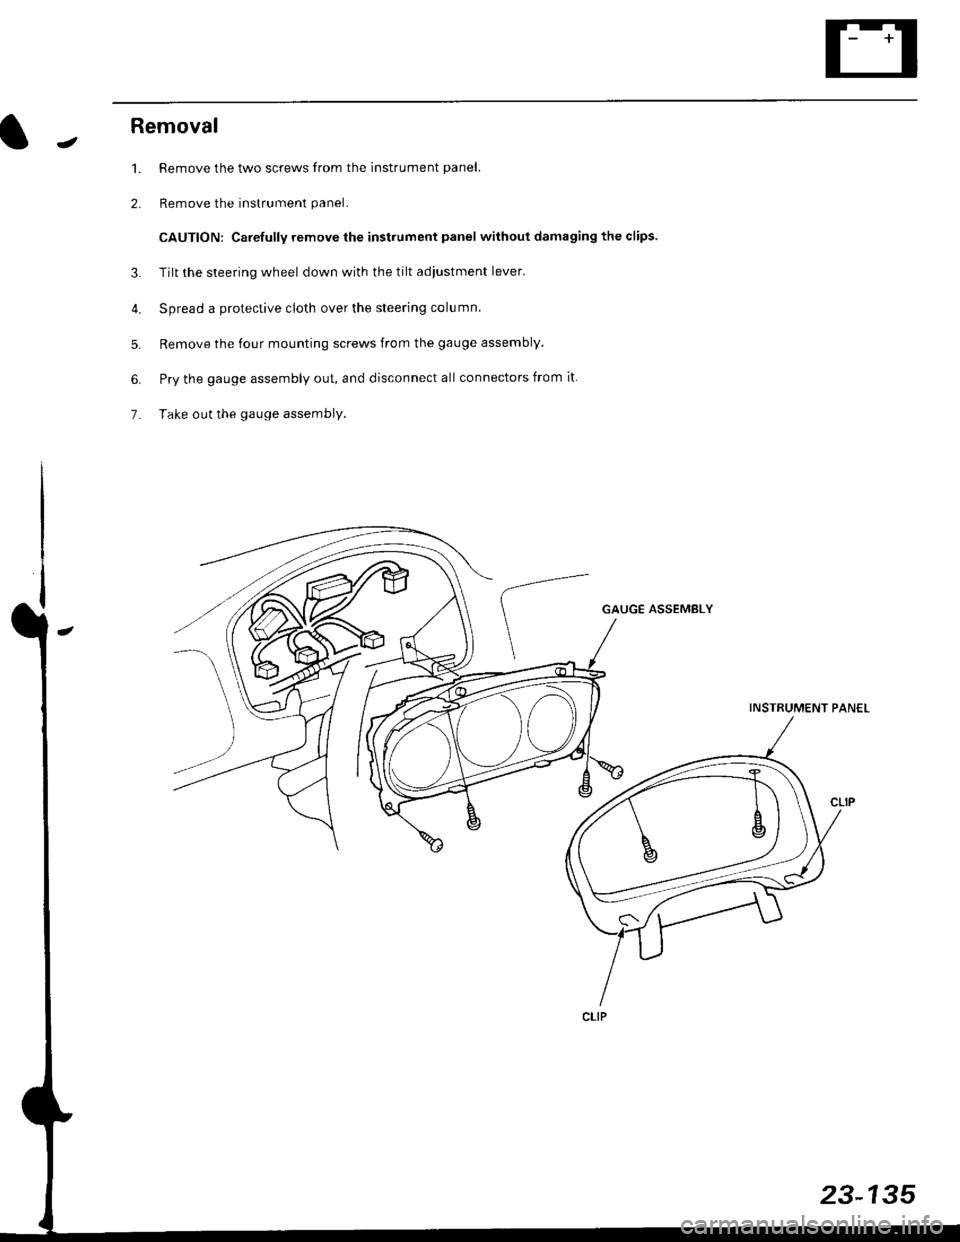 HONDA CIVIC 1998 6.G Workshop Manual JRemoval
1. Remove the two screws from the instrument panel.
2. Remove the instrument panel.
CAUTION: Carefully remove the instrument panel without damaging the clips.
3. Tilt the steering wheel down 